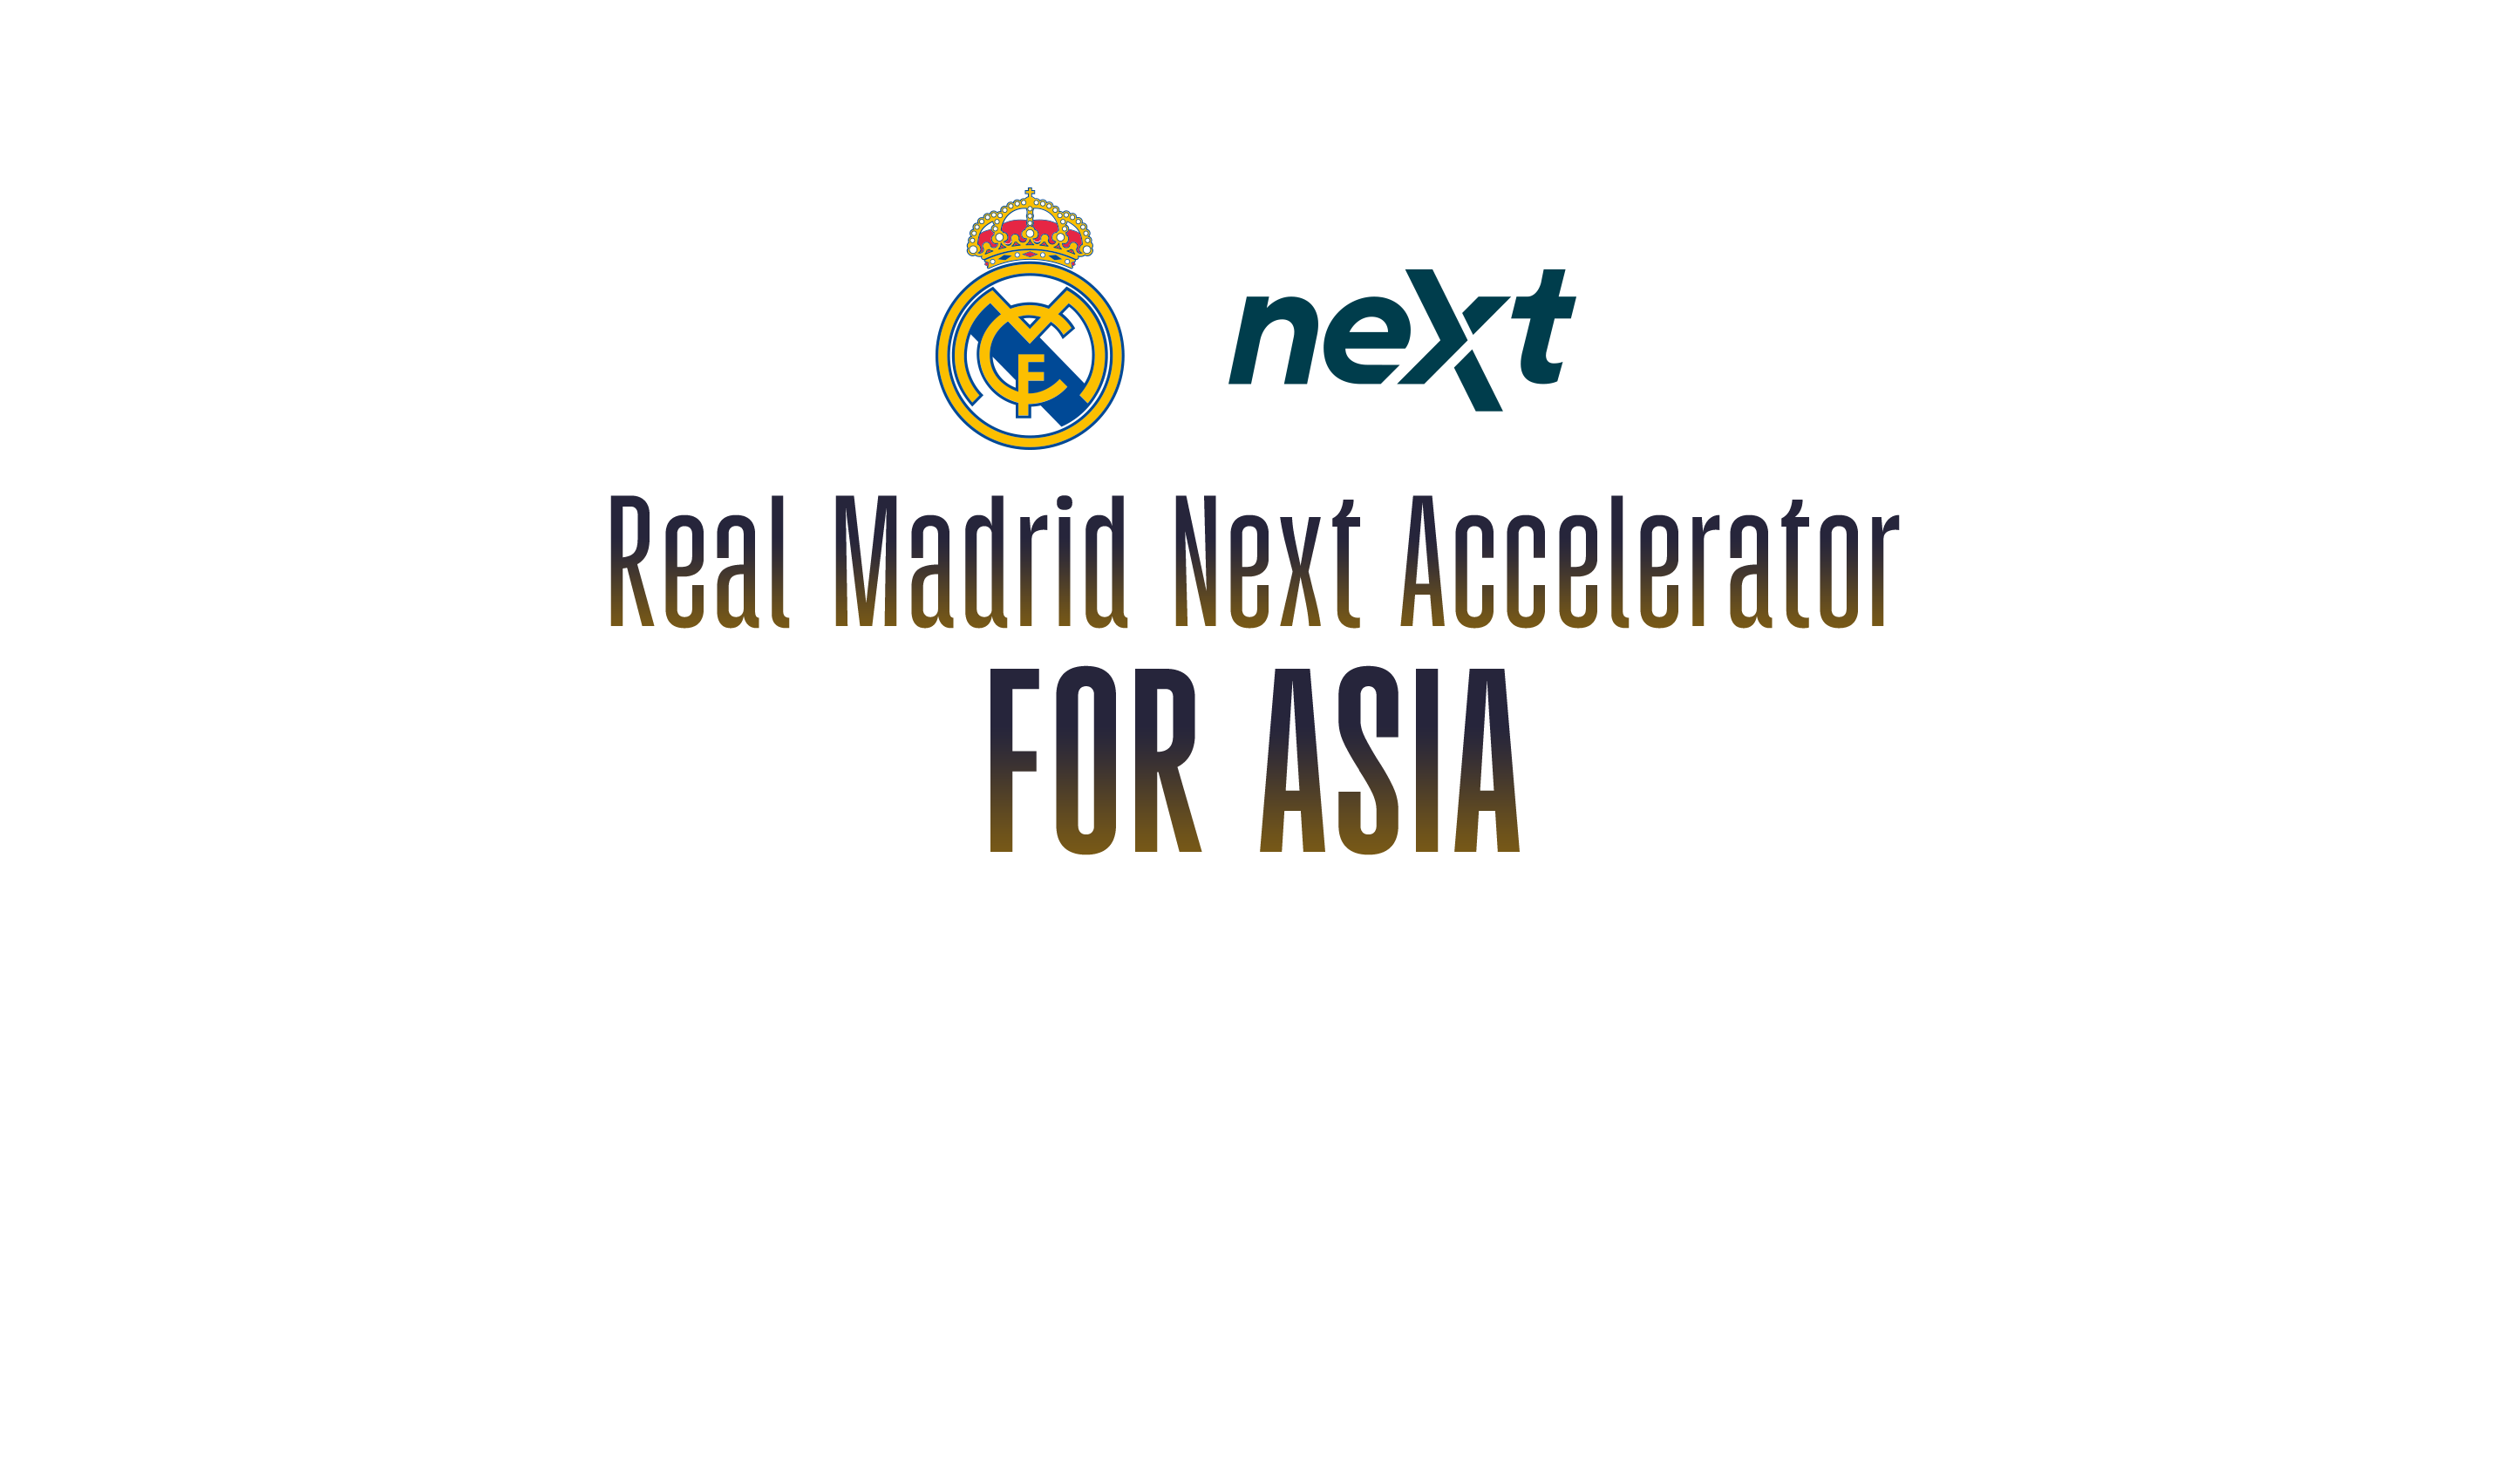 Real Madrid Next Accelerator FOR ASIA